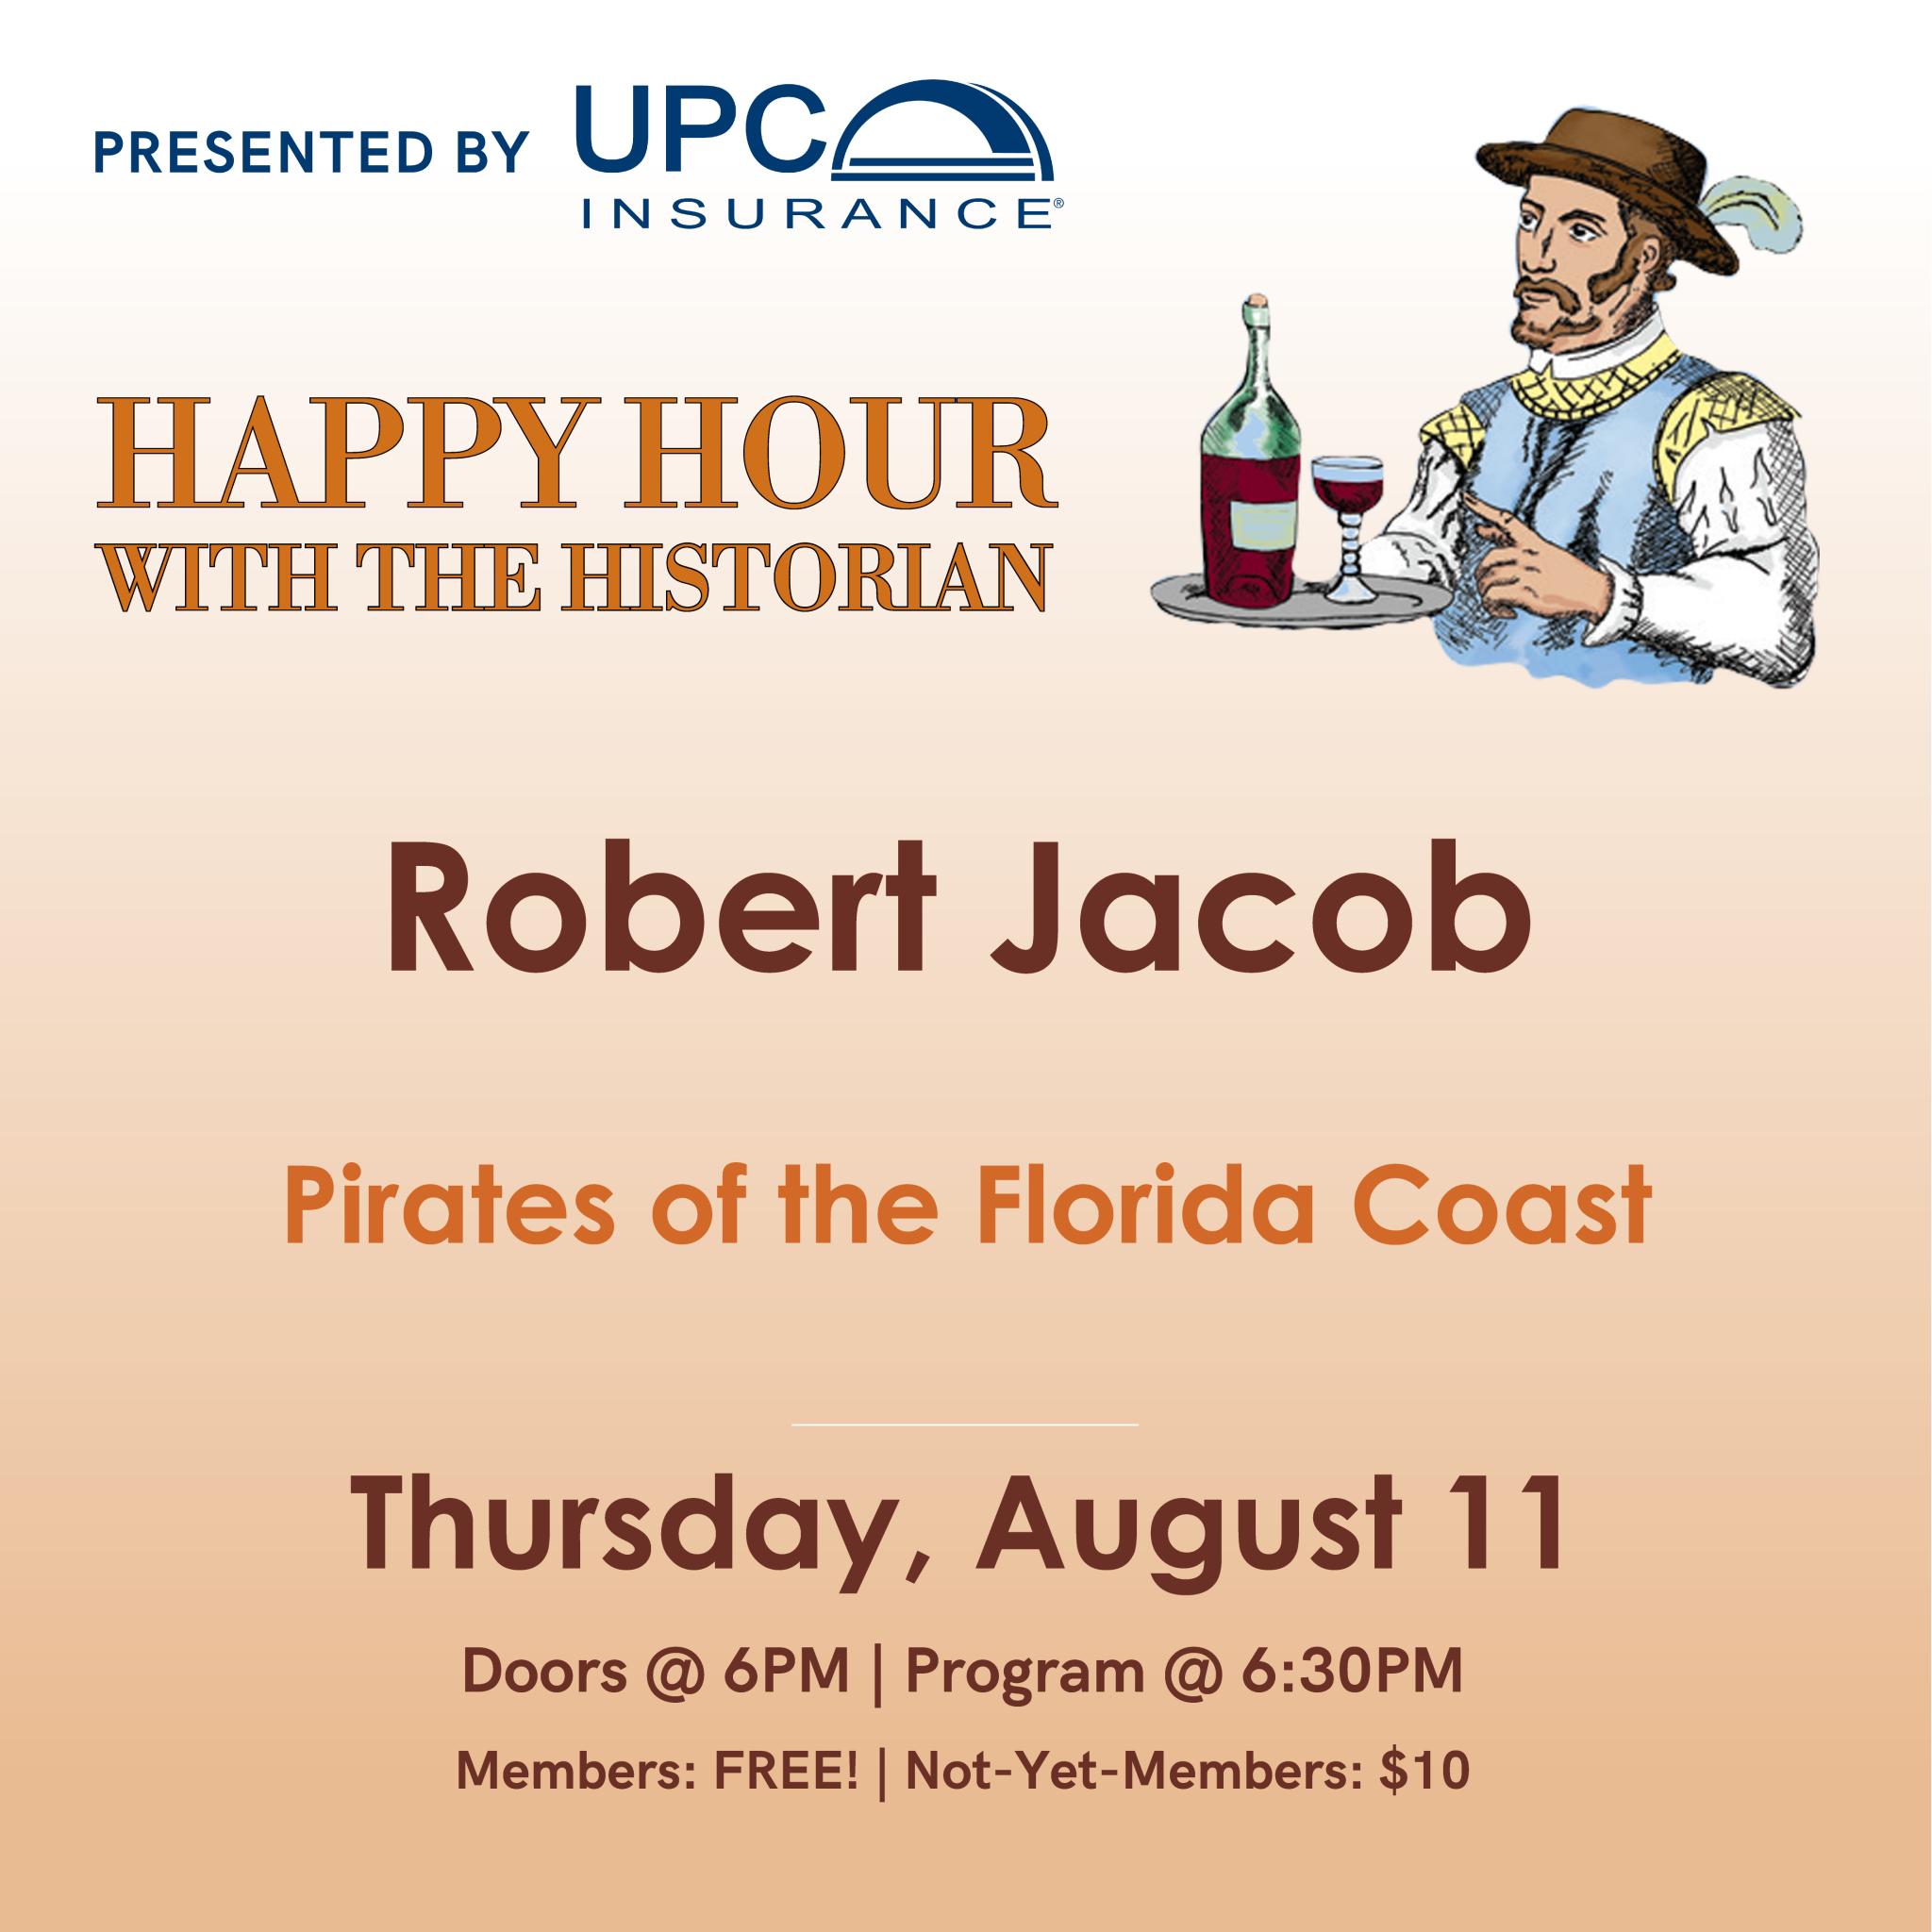 Happy Hour with the Historian: Robert Jacob | Pirates of the Florida Coast